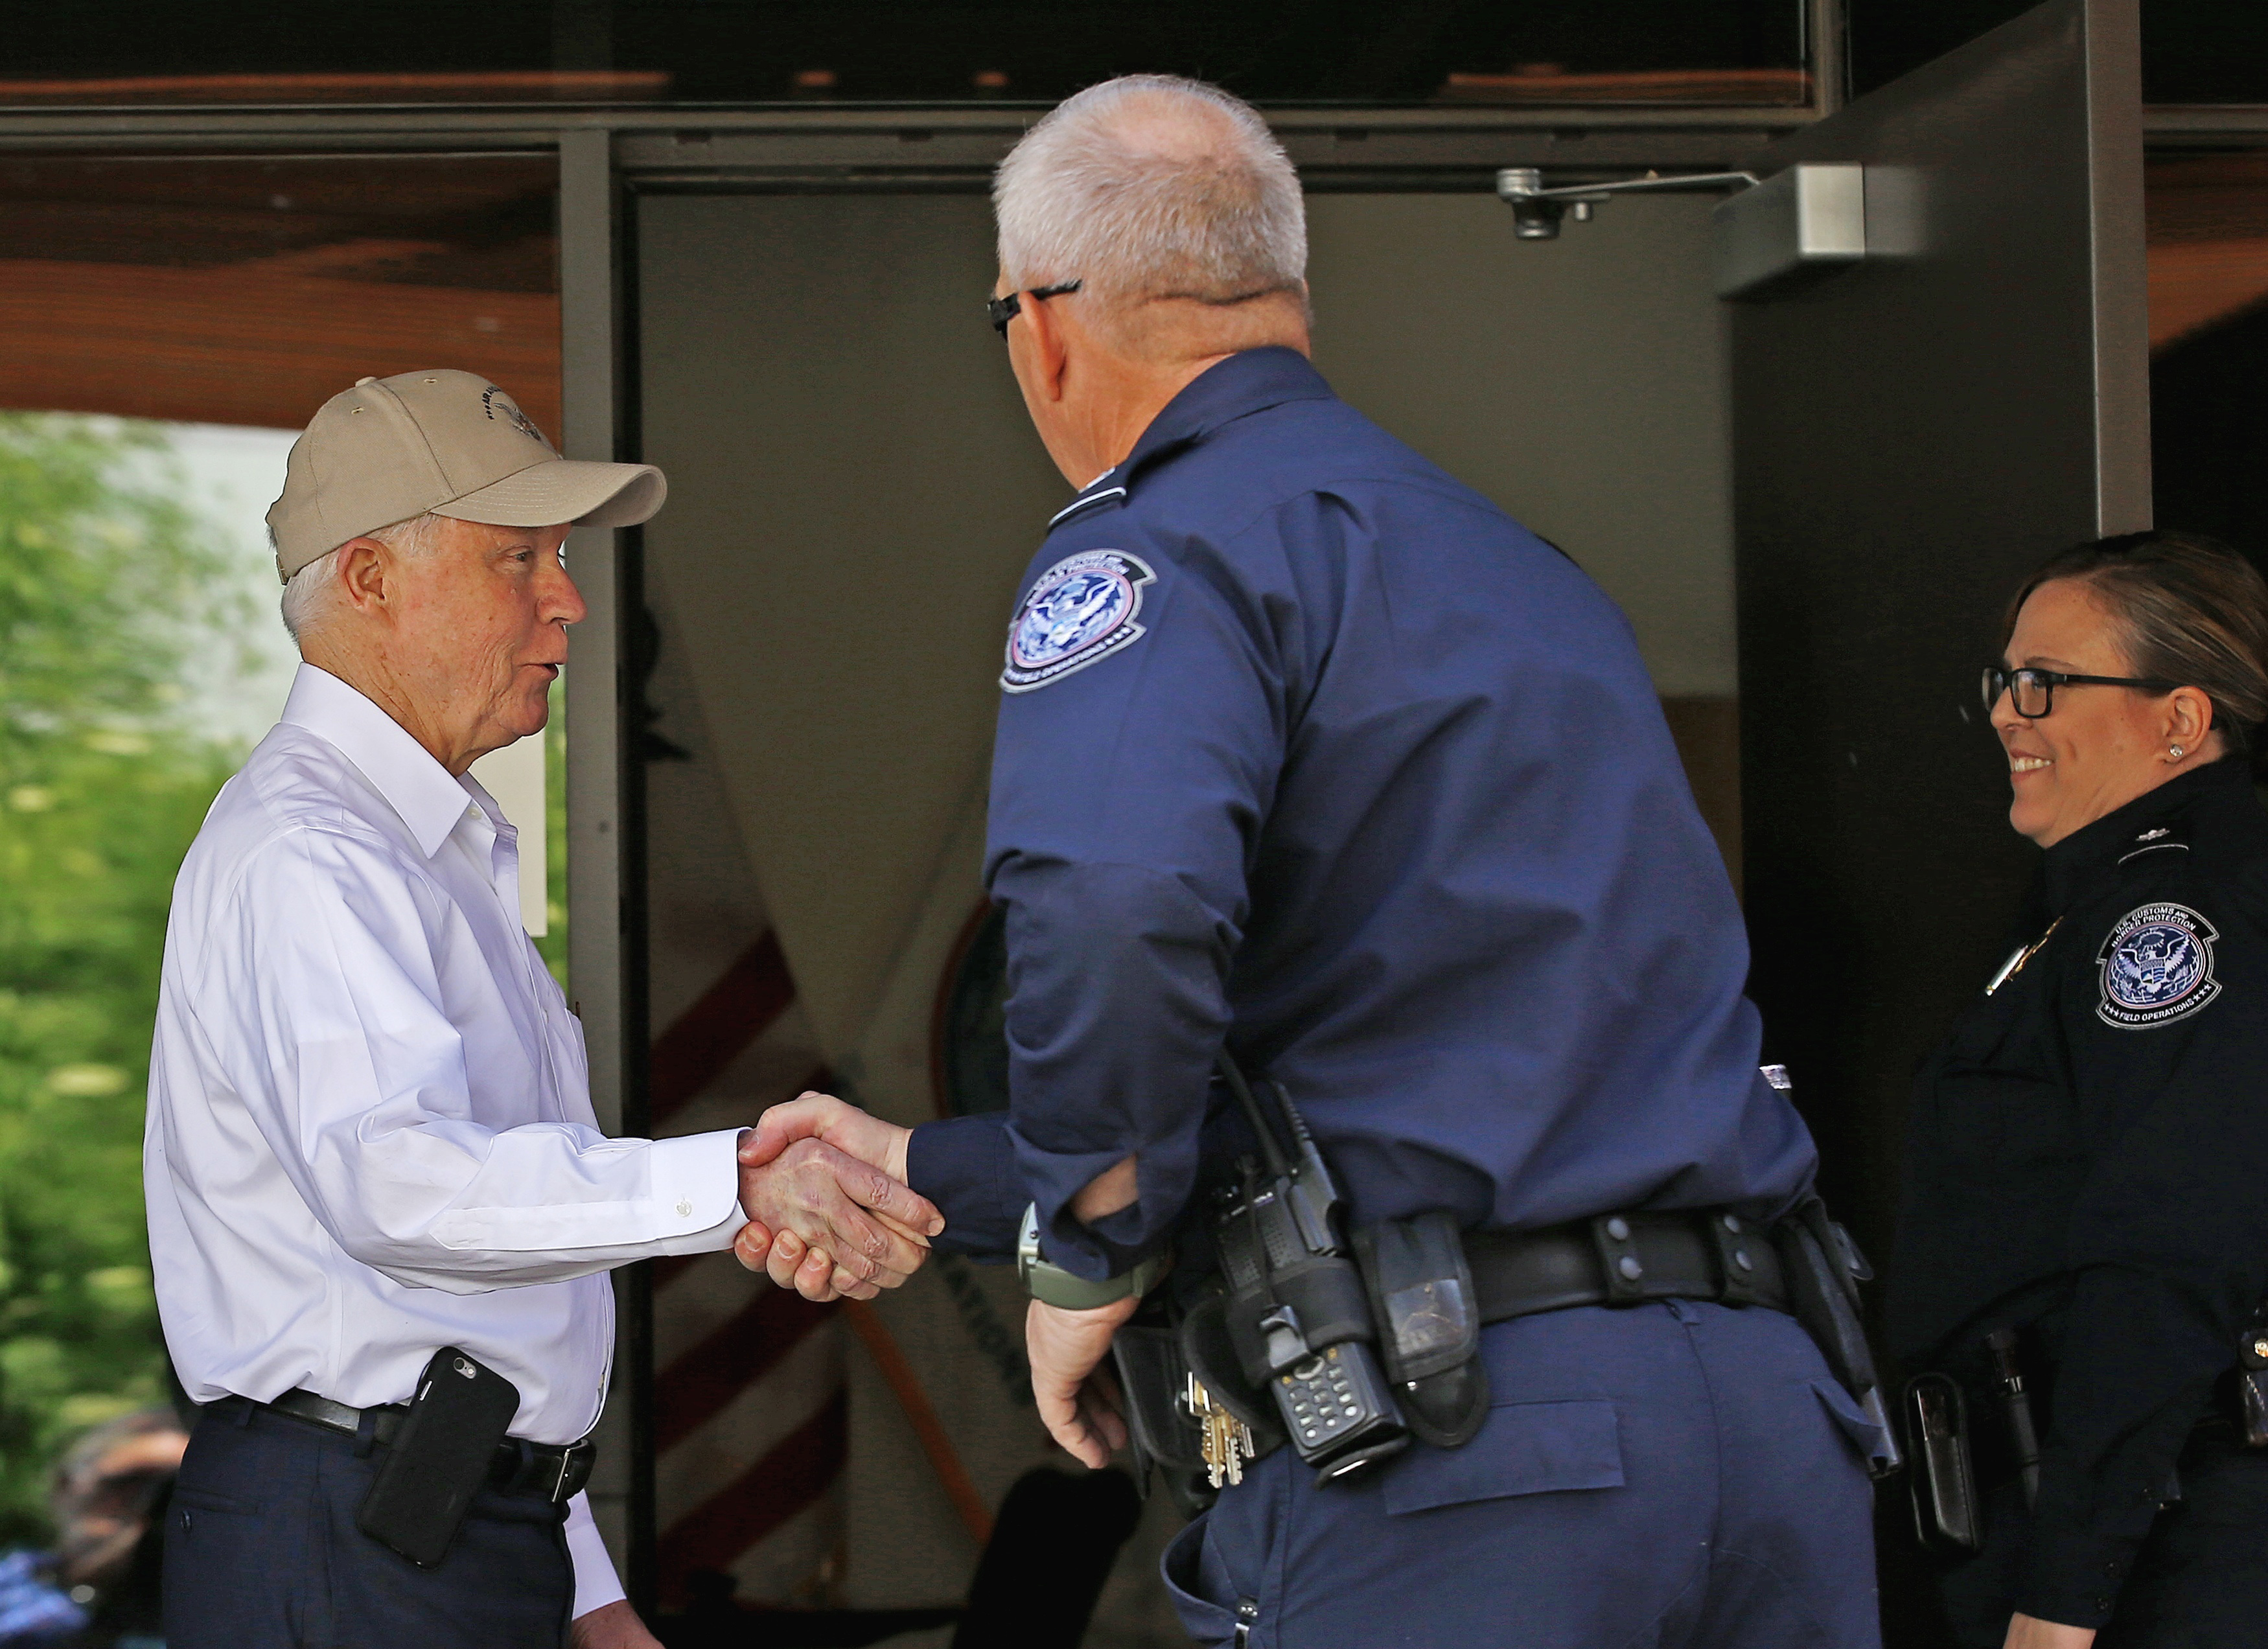 Attorney General Jeff Sessions, left, shakes hands with U.S. Customs and Border Protection officers as he tours the U.S.-Mexico border on April 11, 2017, in Nogales, Ariz. (Ross D. Franklin&mdash;AP)